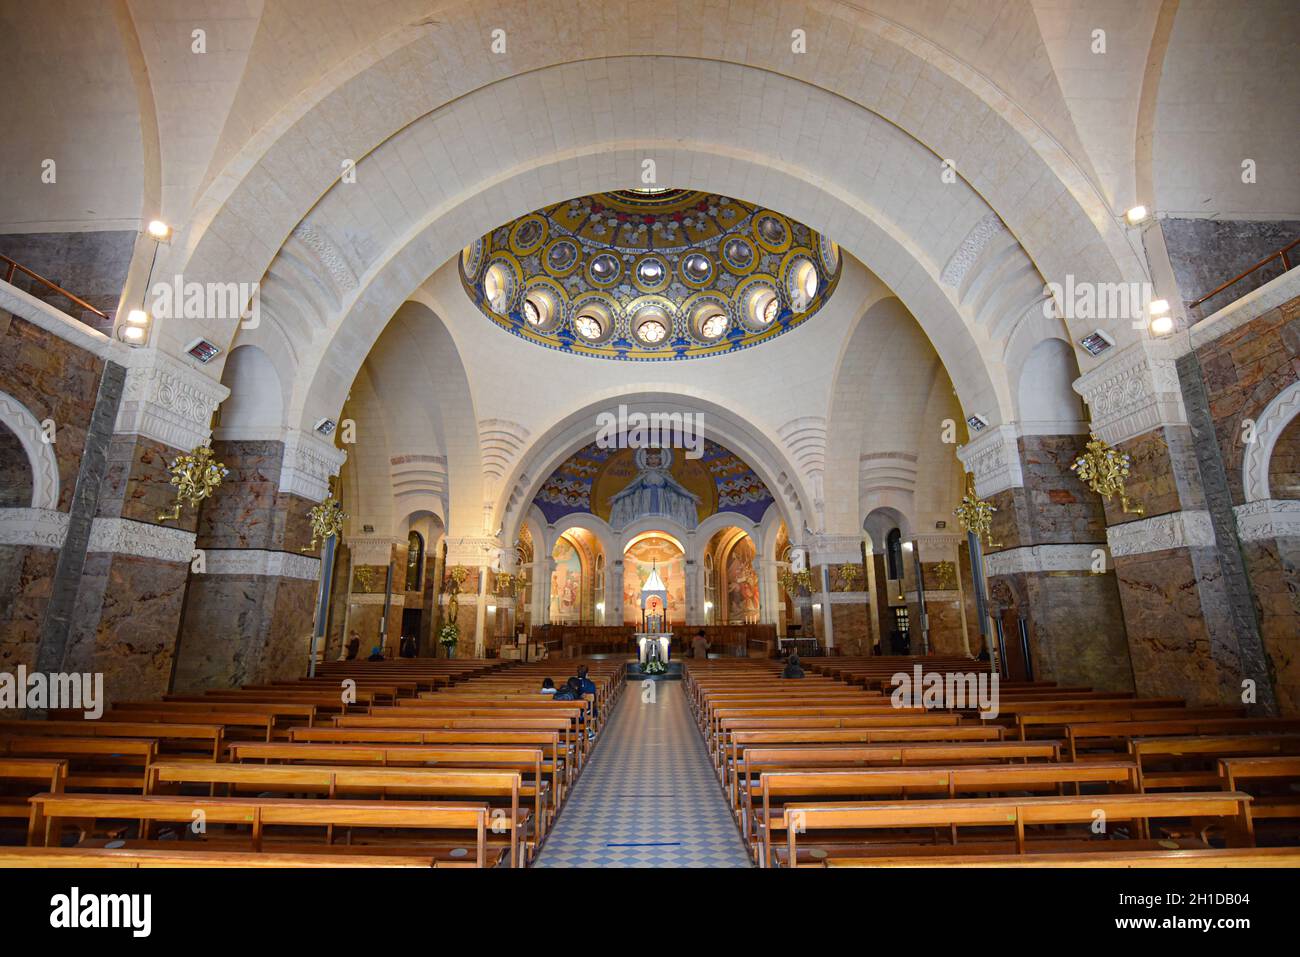 Lourdes, France - 9 Oct, 2021: Interior views of the Basilica Sanctuary of Our Lady of Lourdes Stock Photo